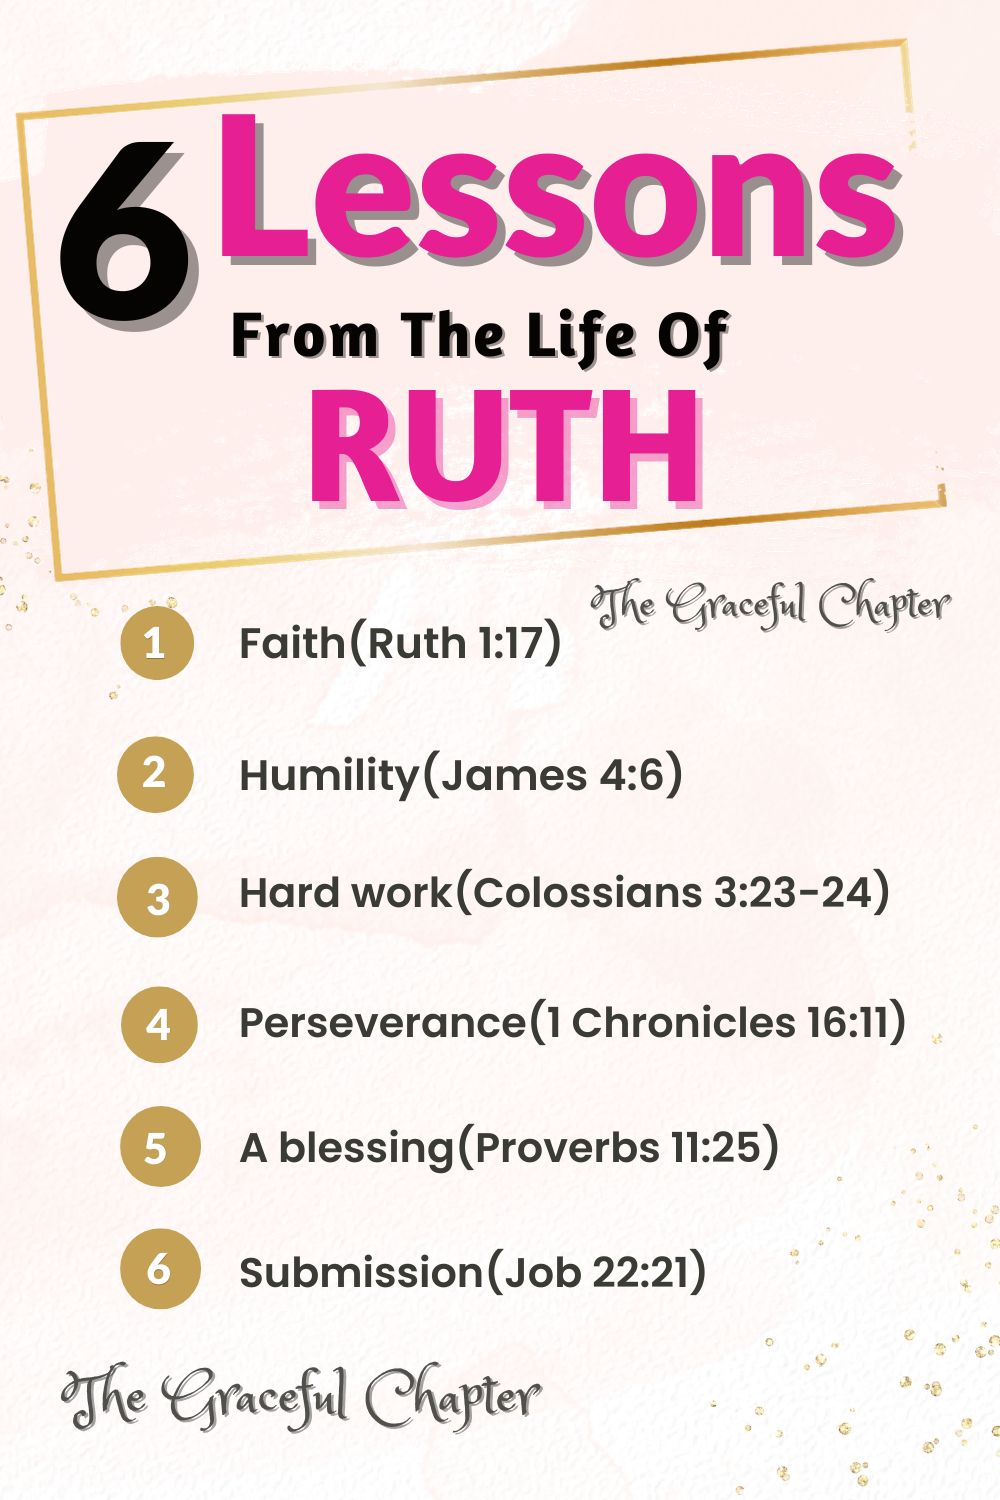 Lessons from the Life of Ruth